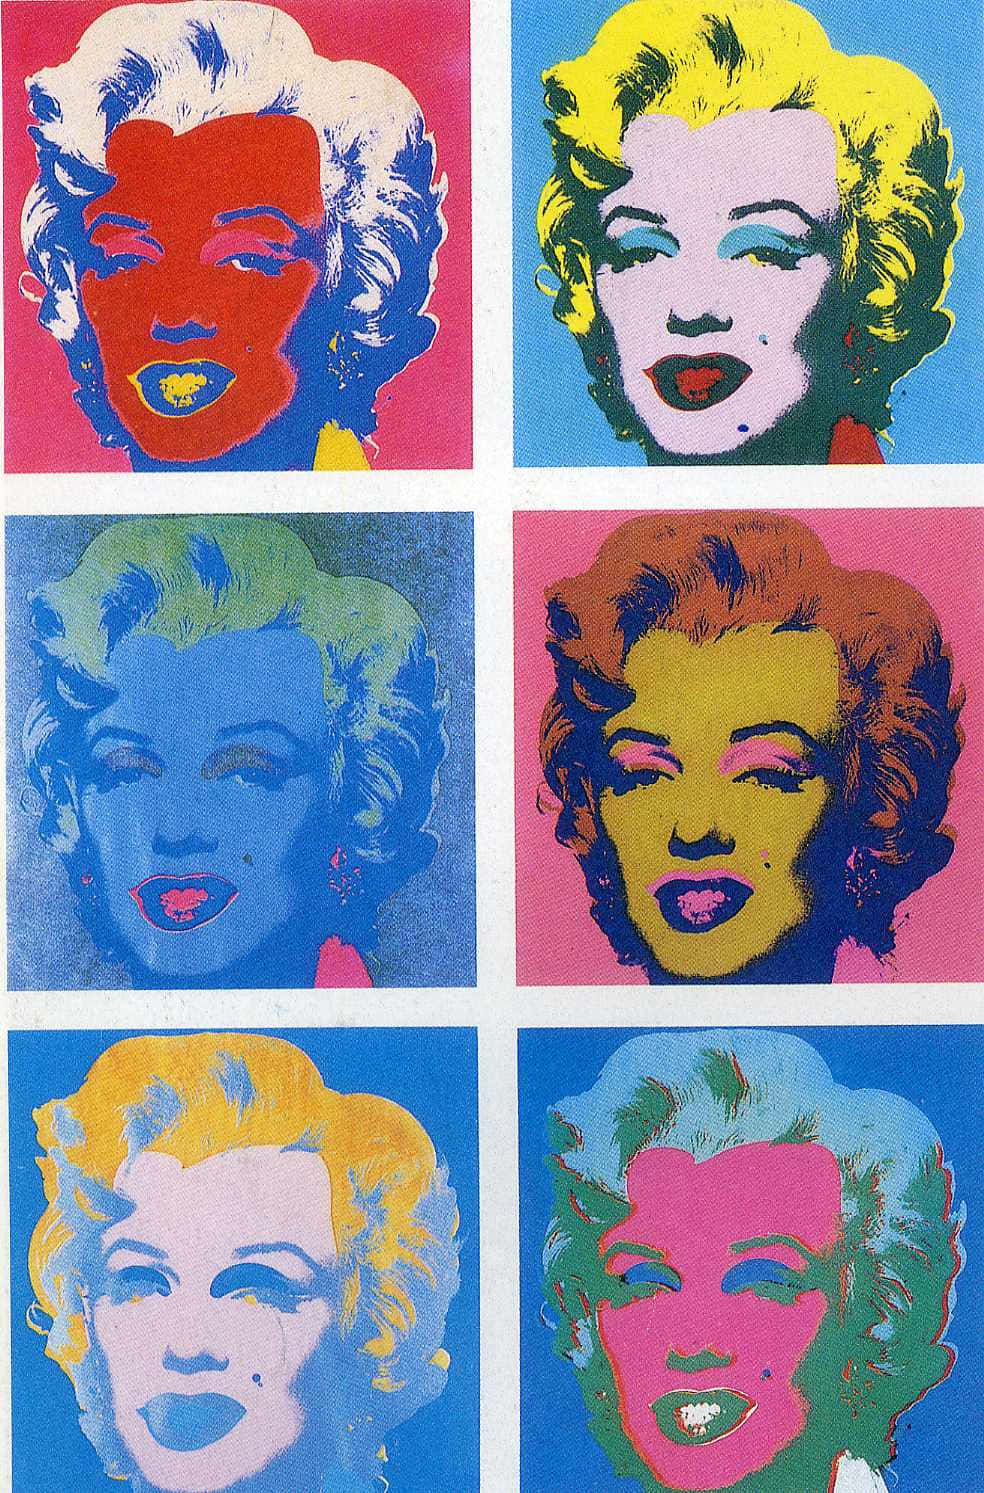 Andy Warhol x Flavor Paper Serves Up Vibrant Pop Art Wallpapers   Architectural Digest